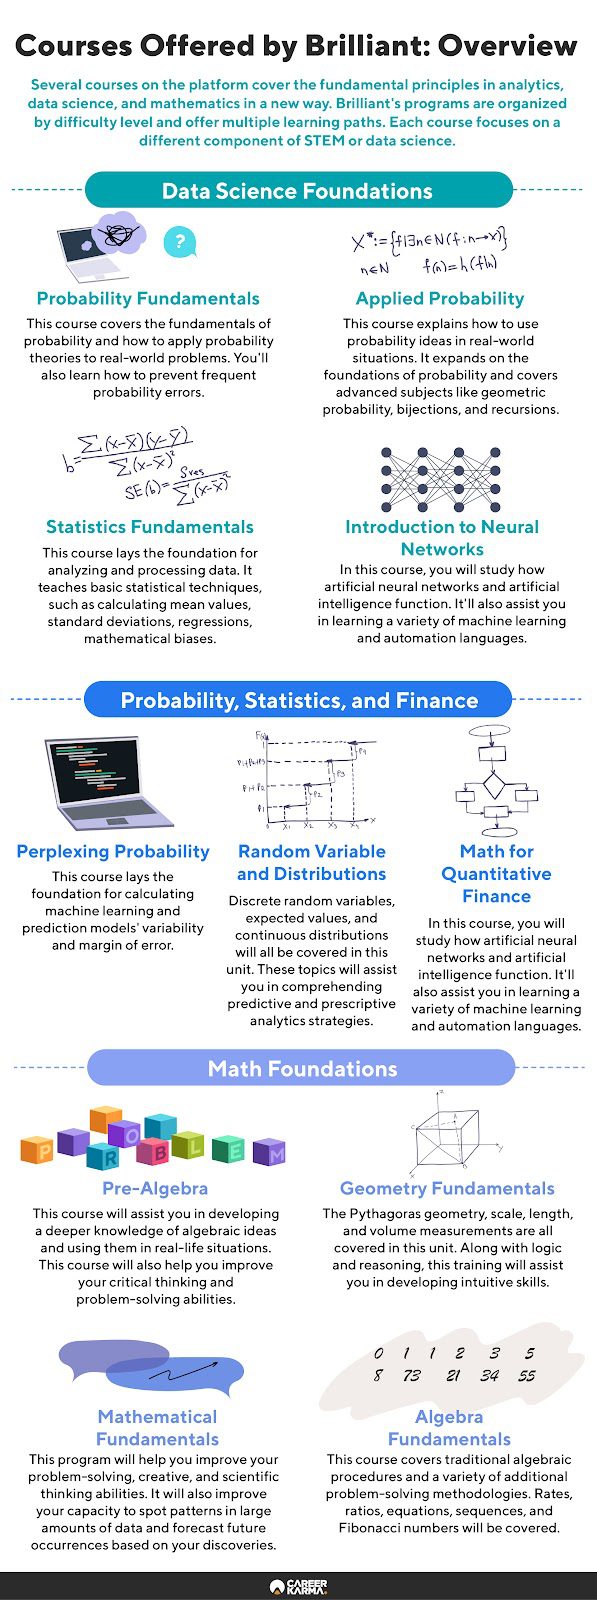 An infographic featuring Brilliant platform’s data science courses